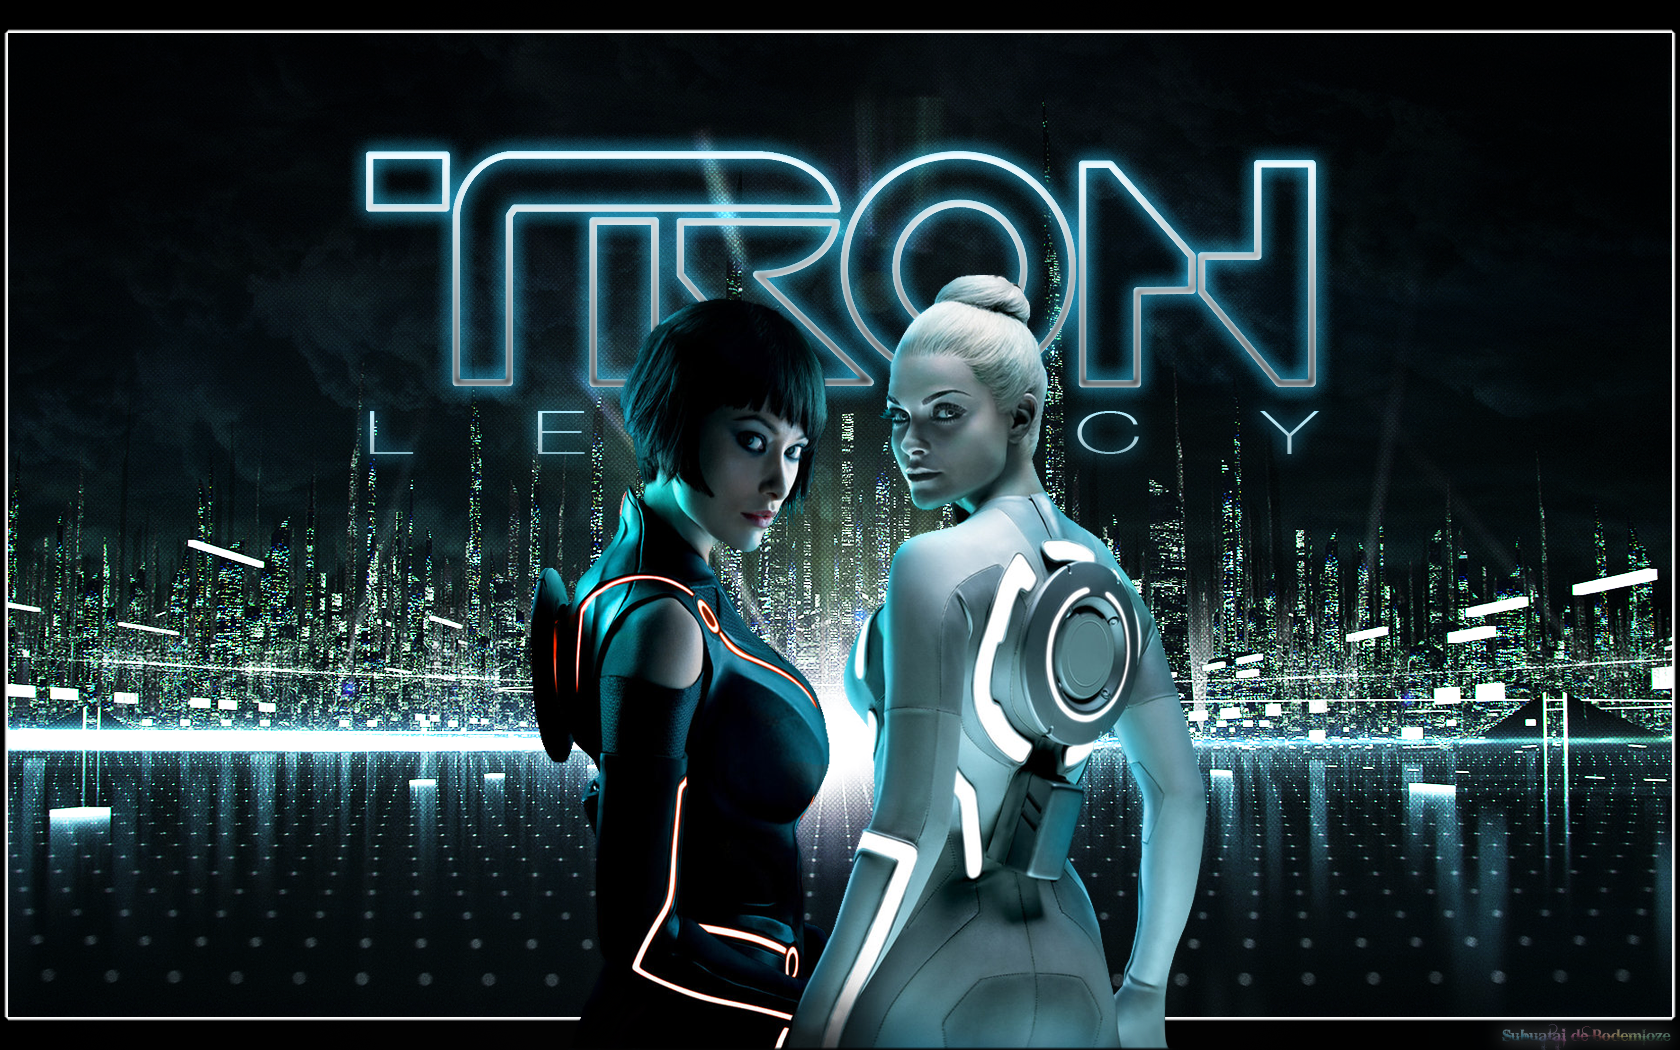 Tron Legacy Wallpaper by Subuatai on